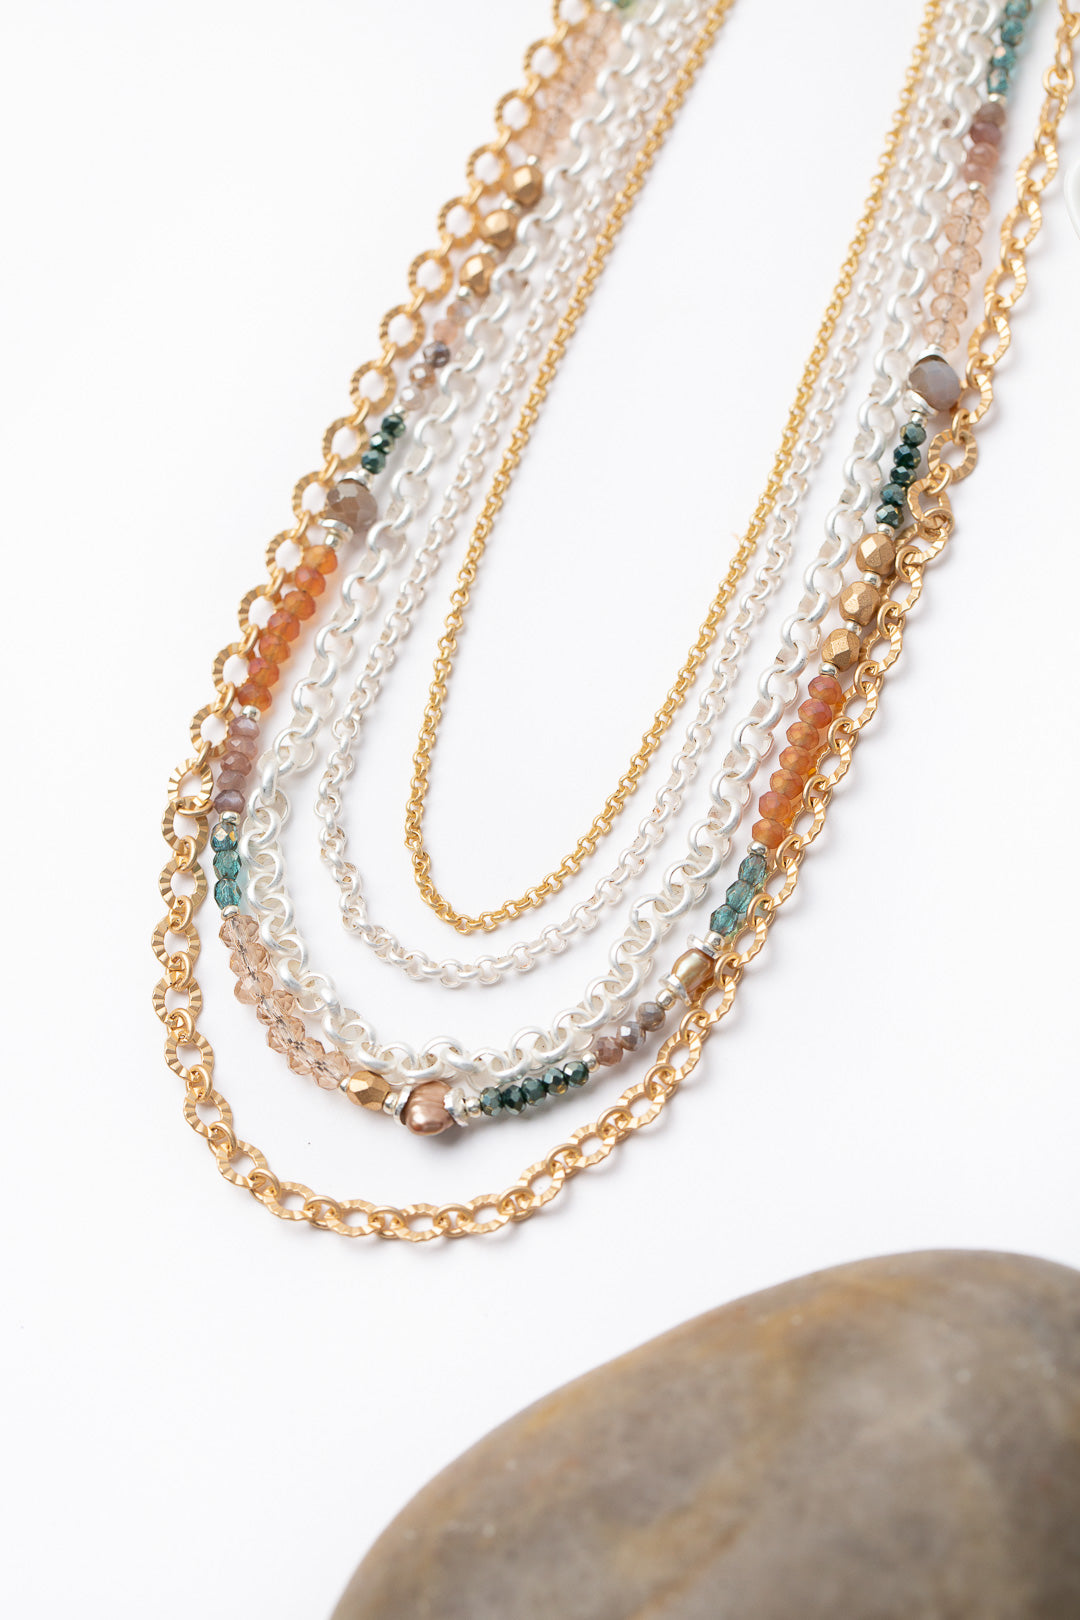 Emerald Isle 16.5 or 26.5" Moonstone, Pearl, Czech Glass Multistrand Necklace